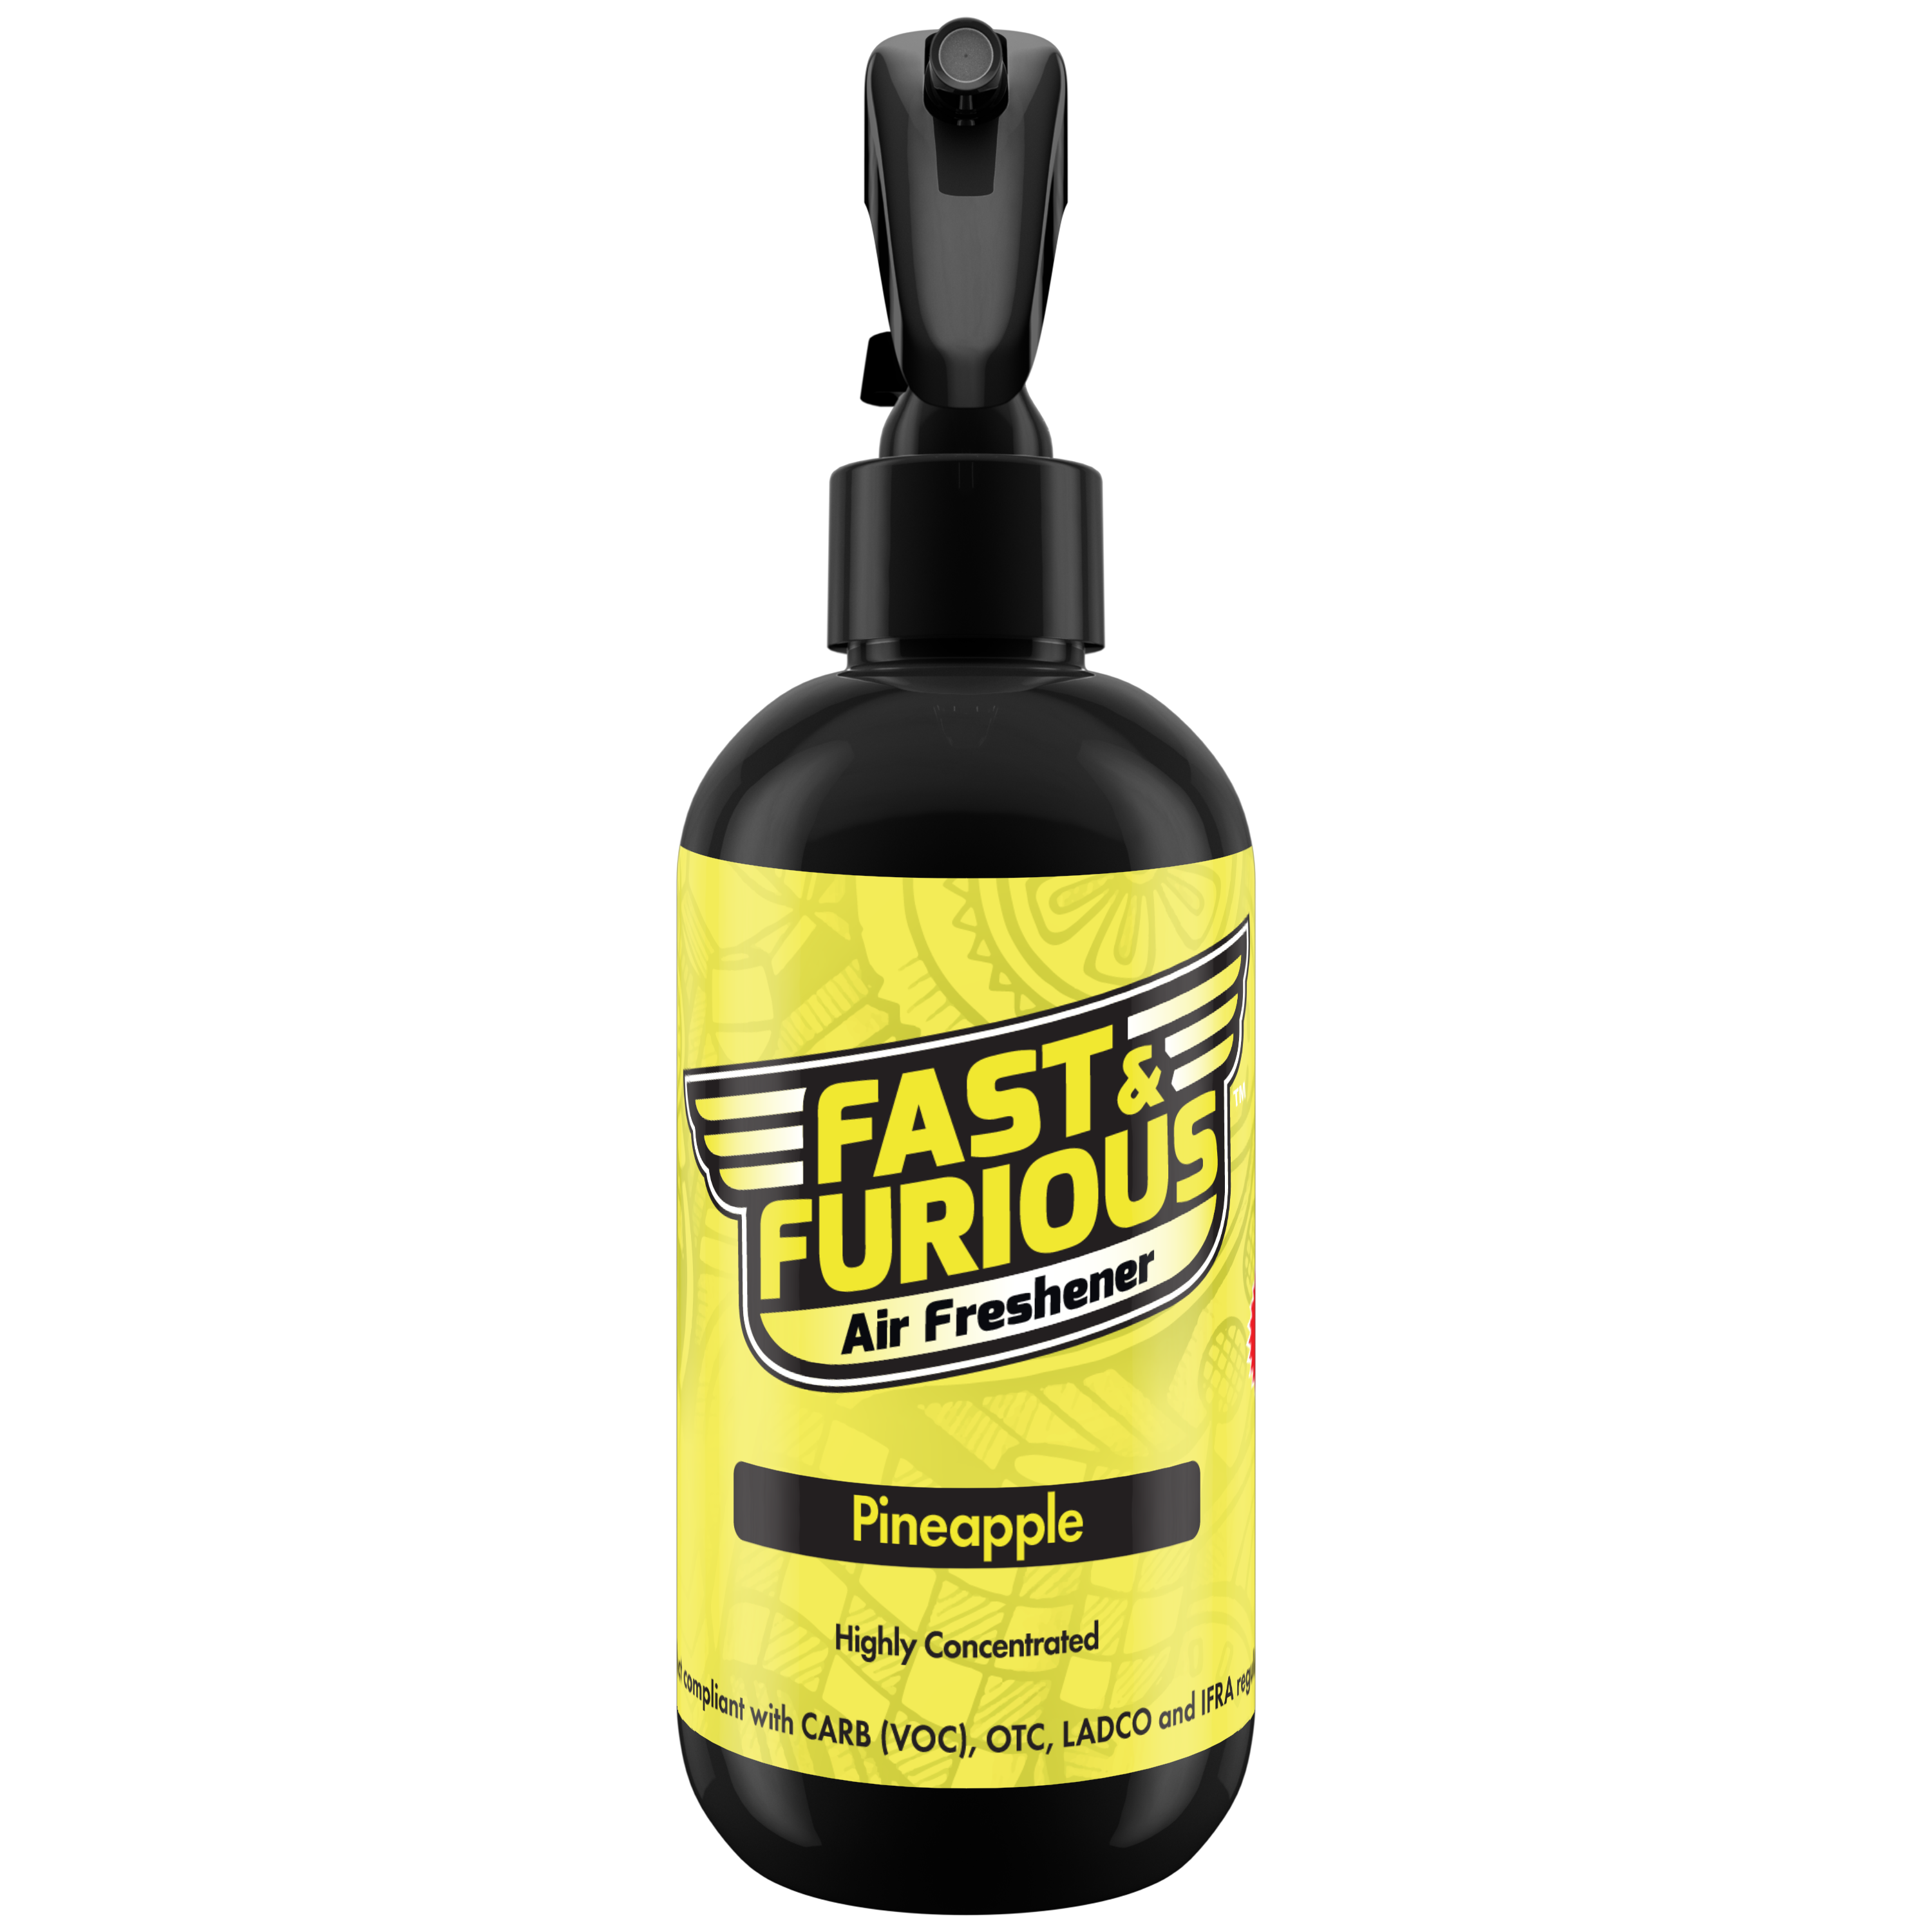 Fast and Furious Air Freshener - Pineapple Scent Size: 8oz